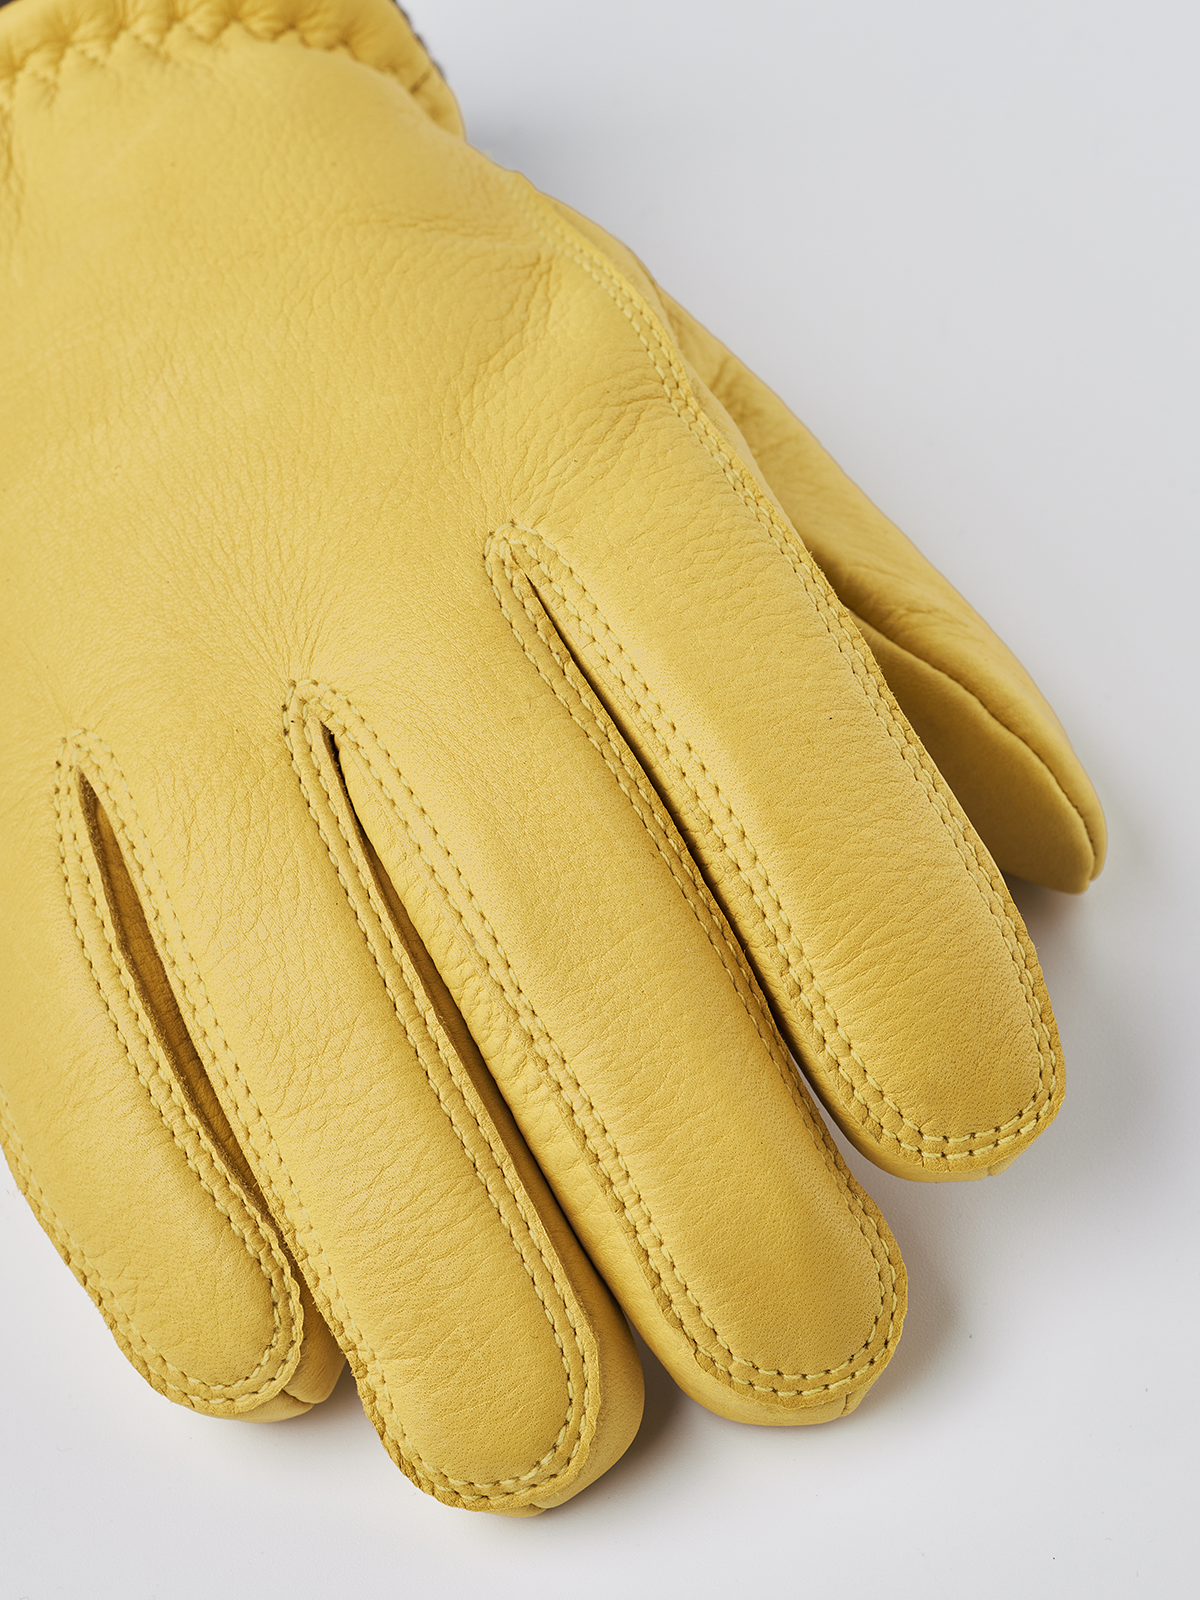 Tore - Natural yellow | Hestra Gloves